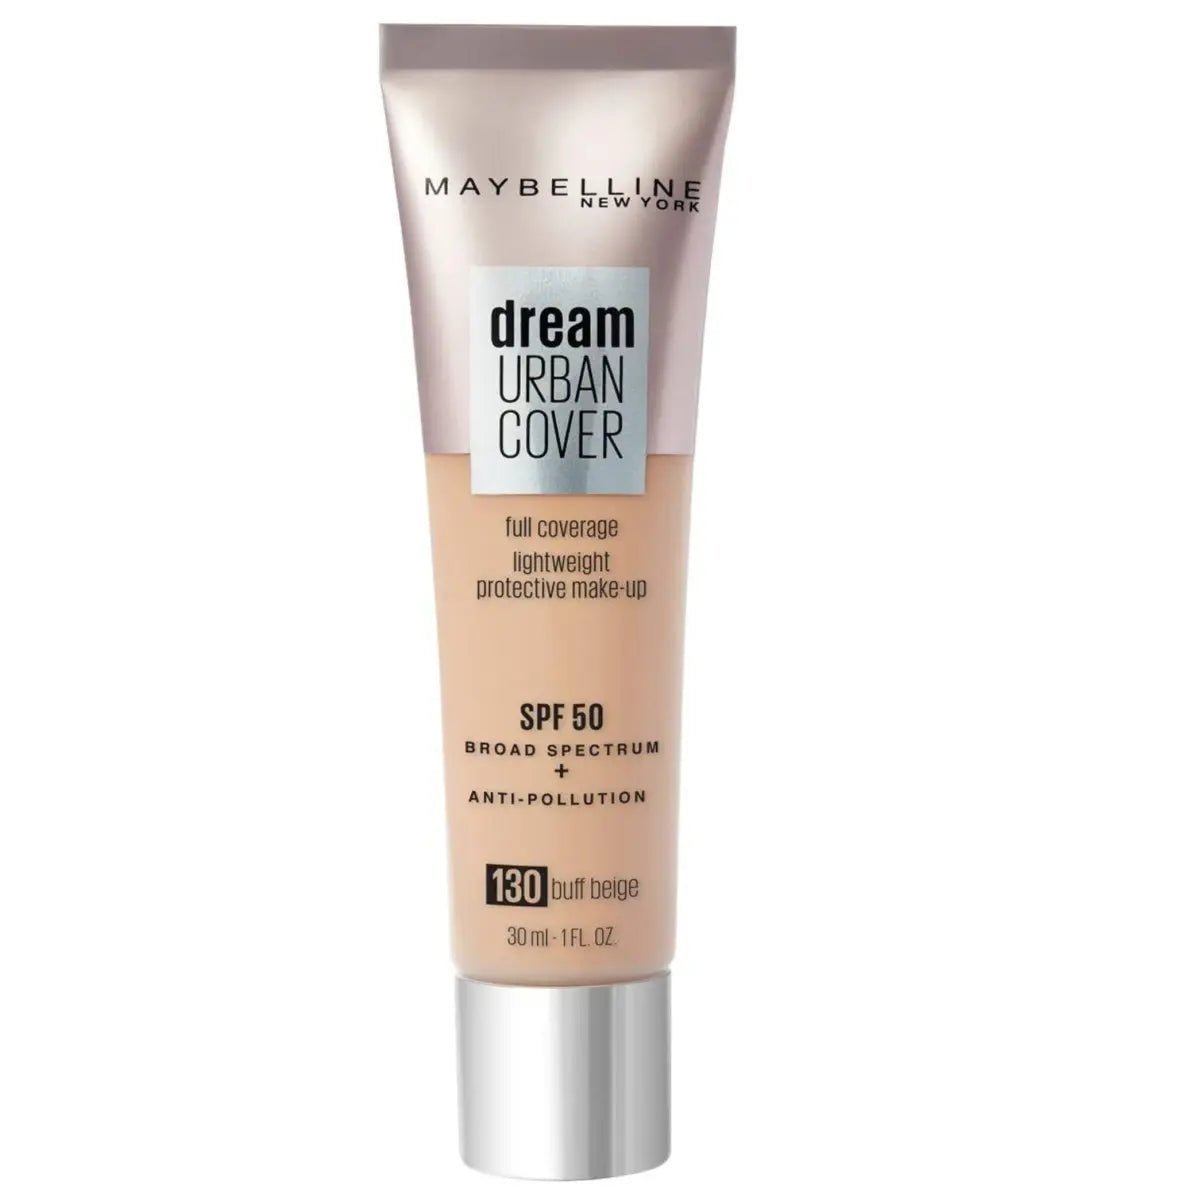 Image of Maybelline Dream Urban Cover Foundation - 130 Buff Beige